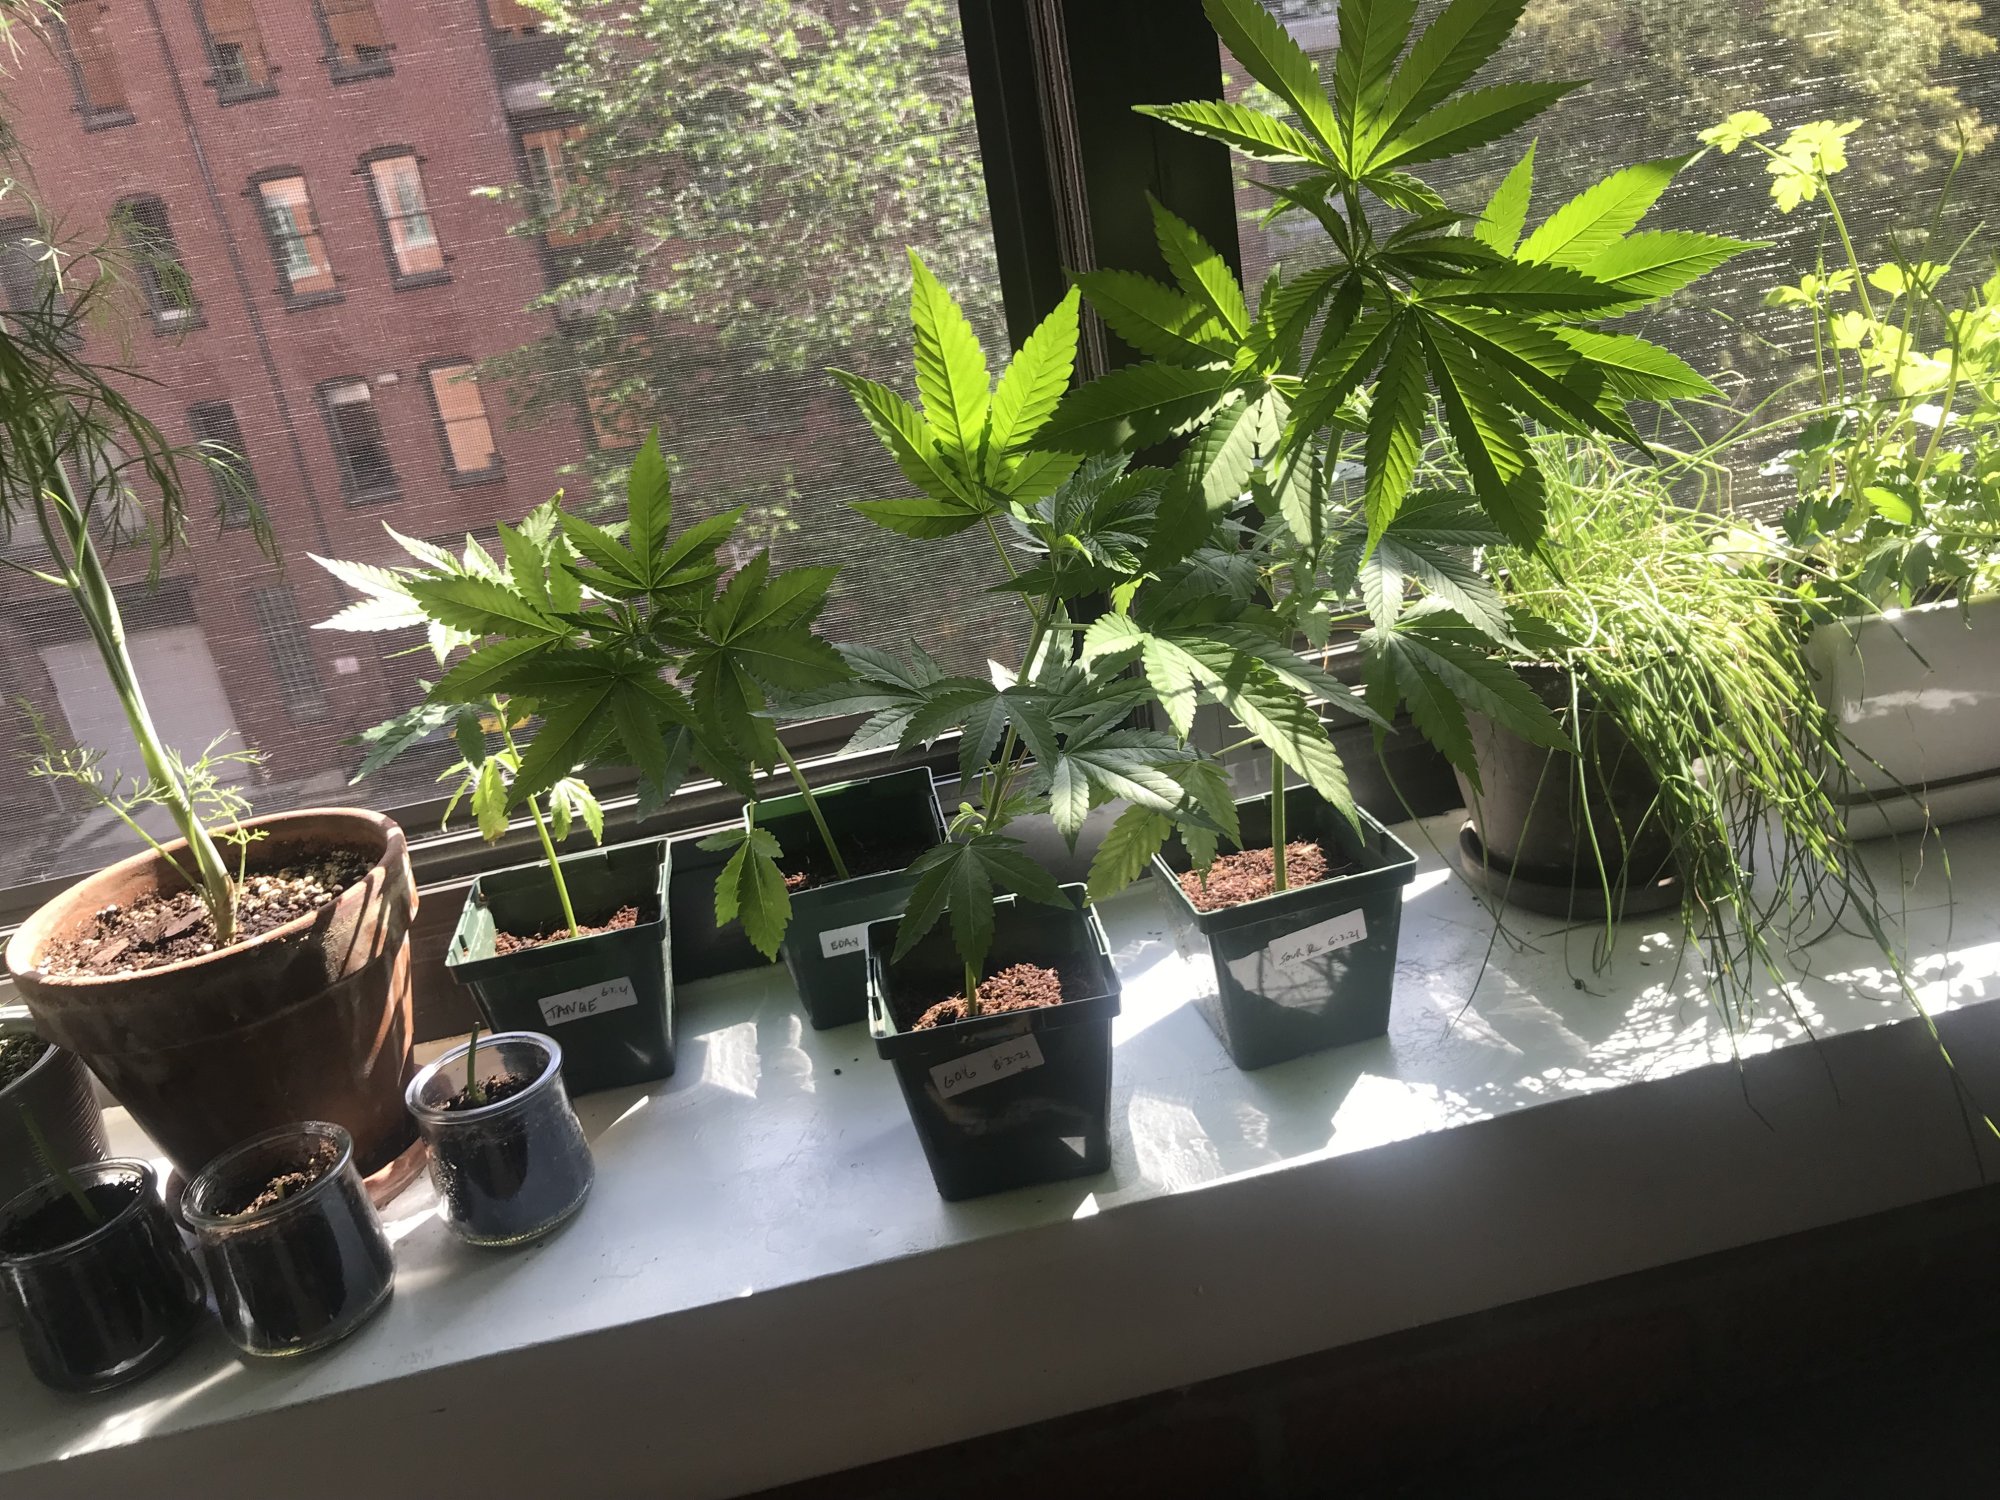 Starting clones outside very late what are my best options